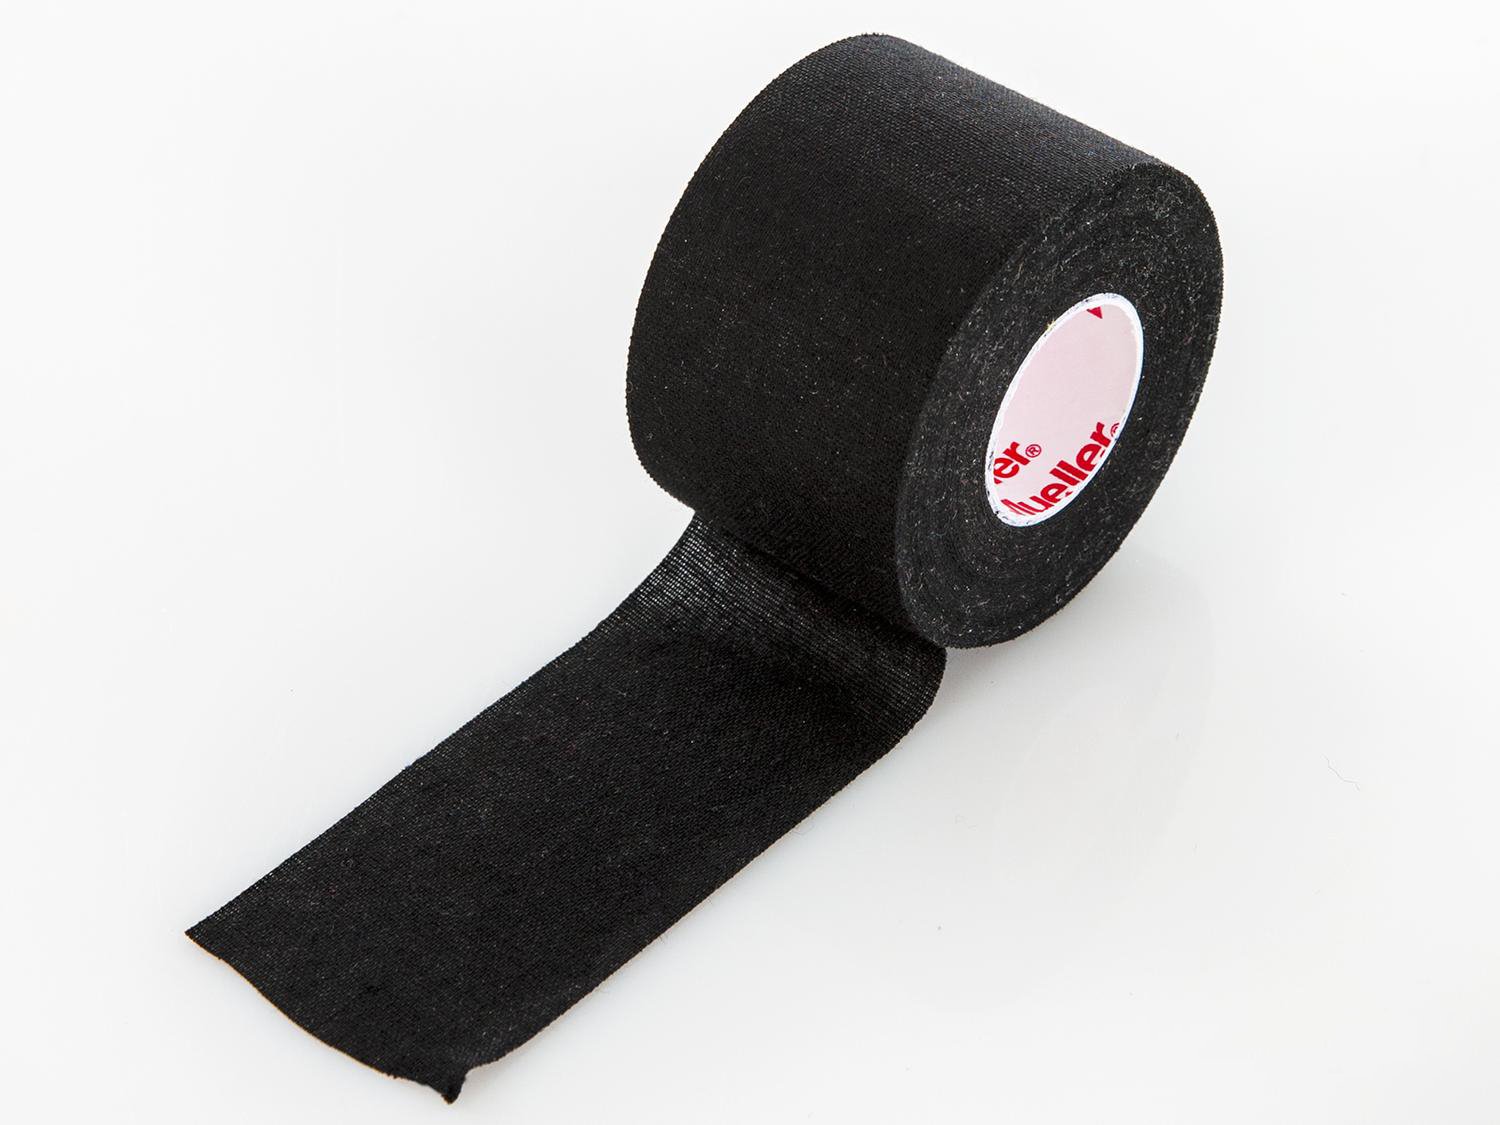 Trainers Athletic Tape / Lacrosse Grip Tape